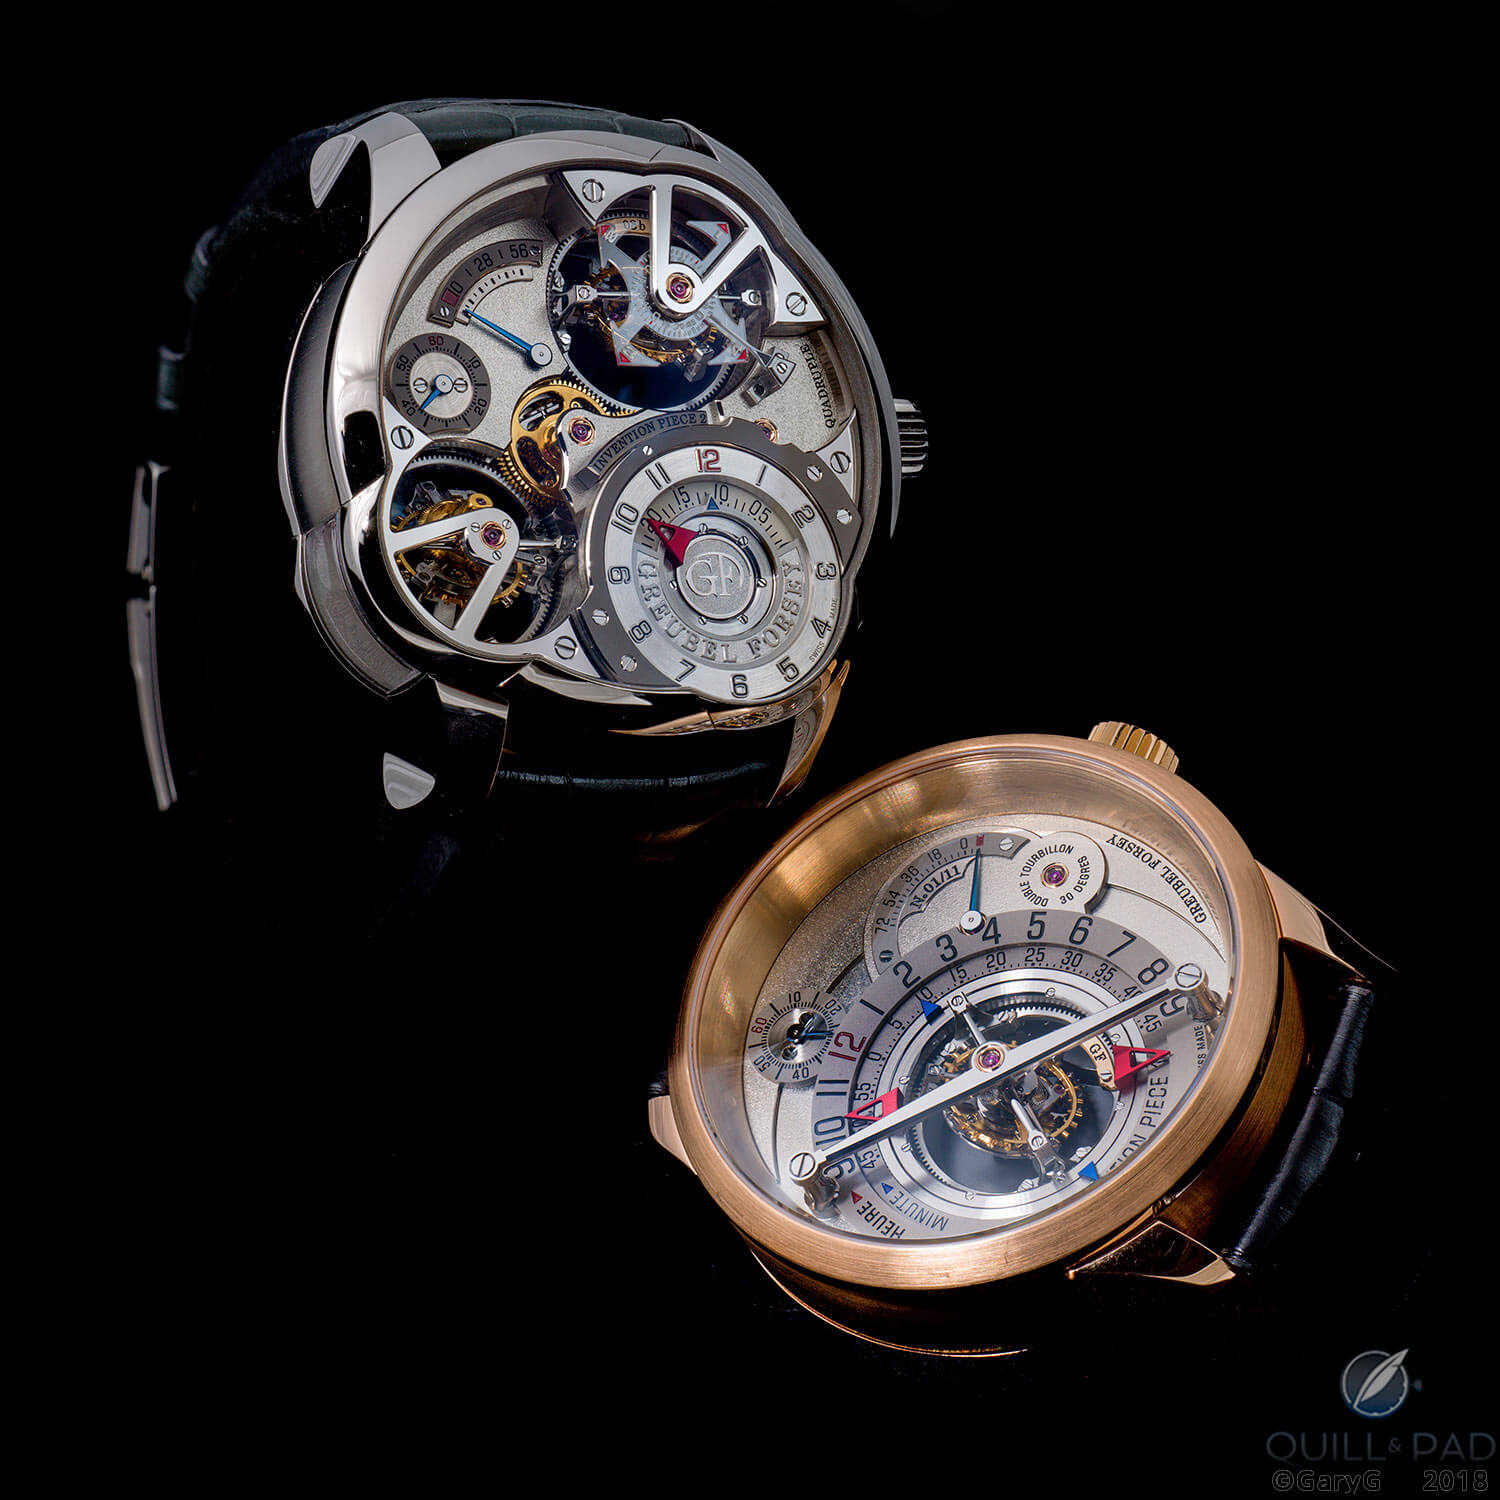 Which one for you? Invention Pieces 2 and 1 by Greubel Forsey